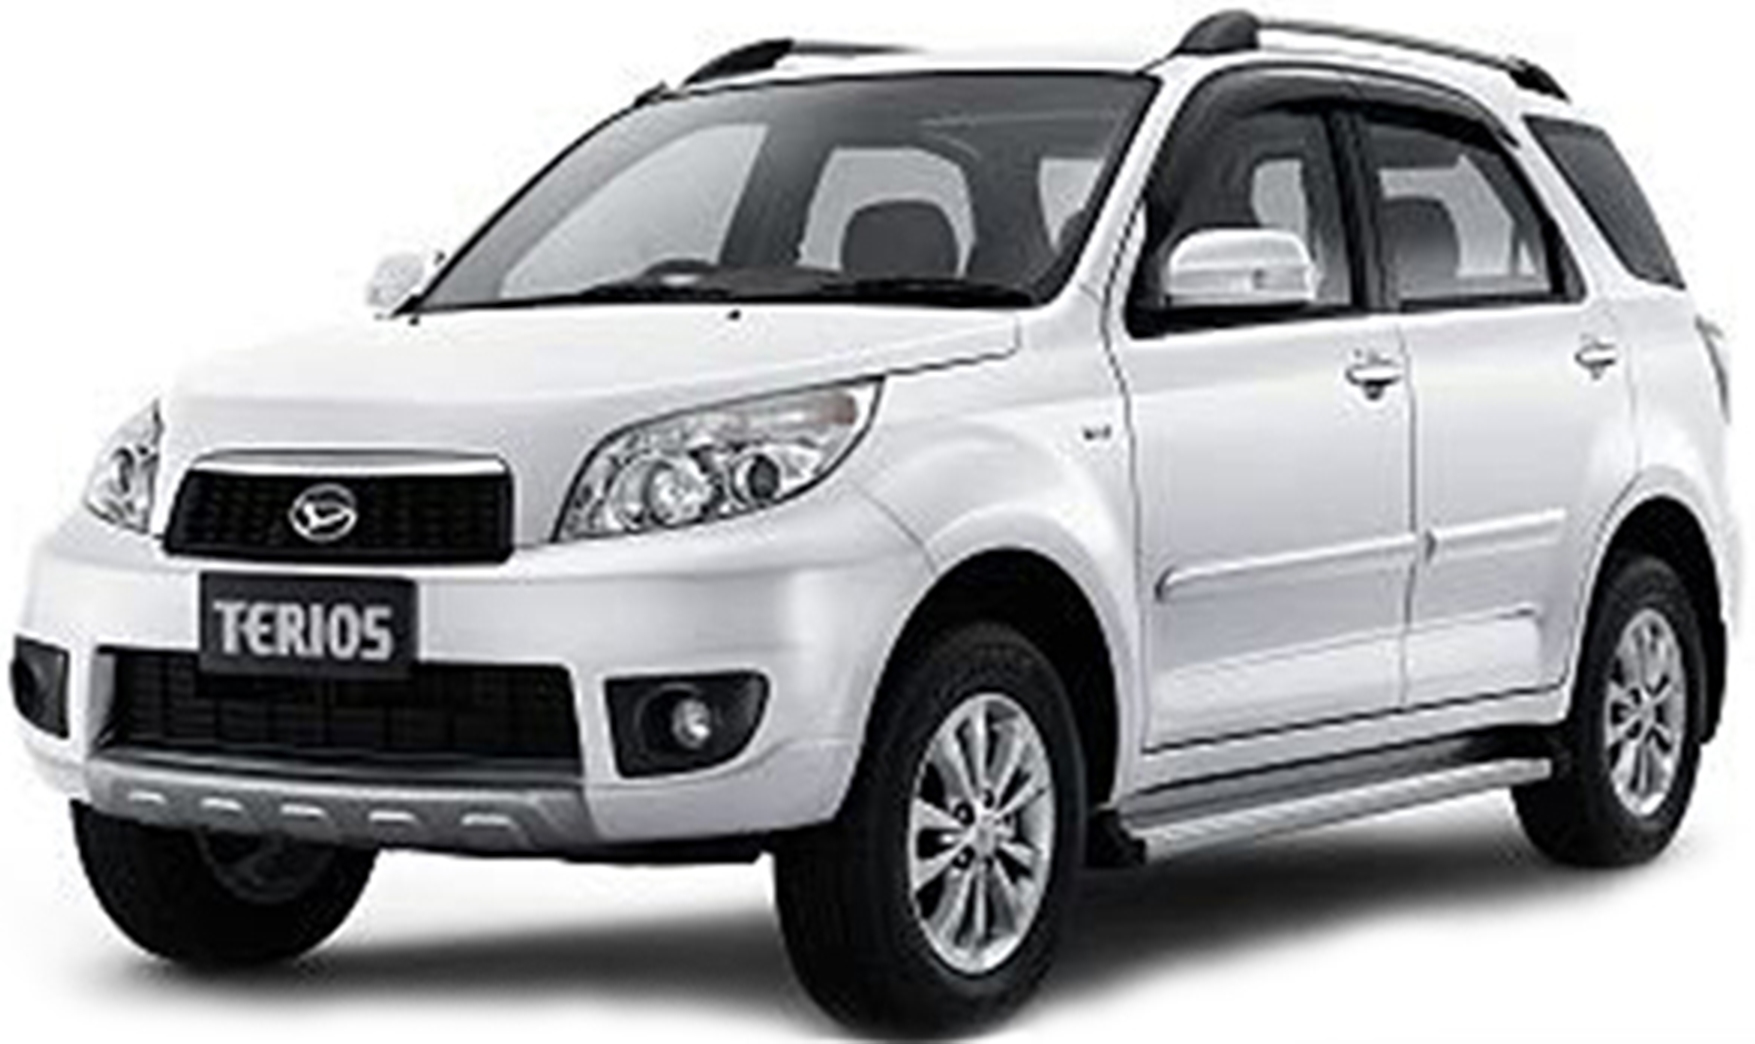 Daihatsu Terios 4x2 Automatic Specifications Price Features Images & Colors In Pakistan